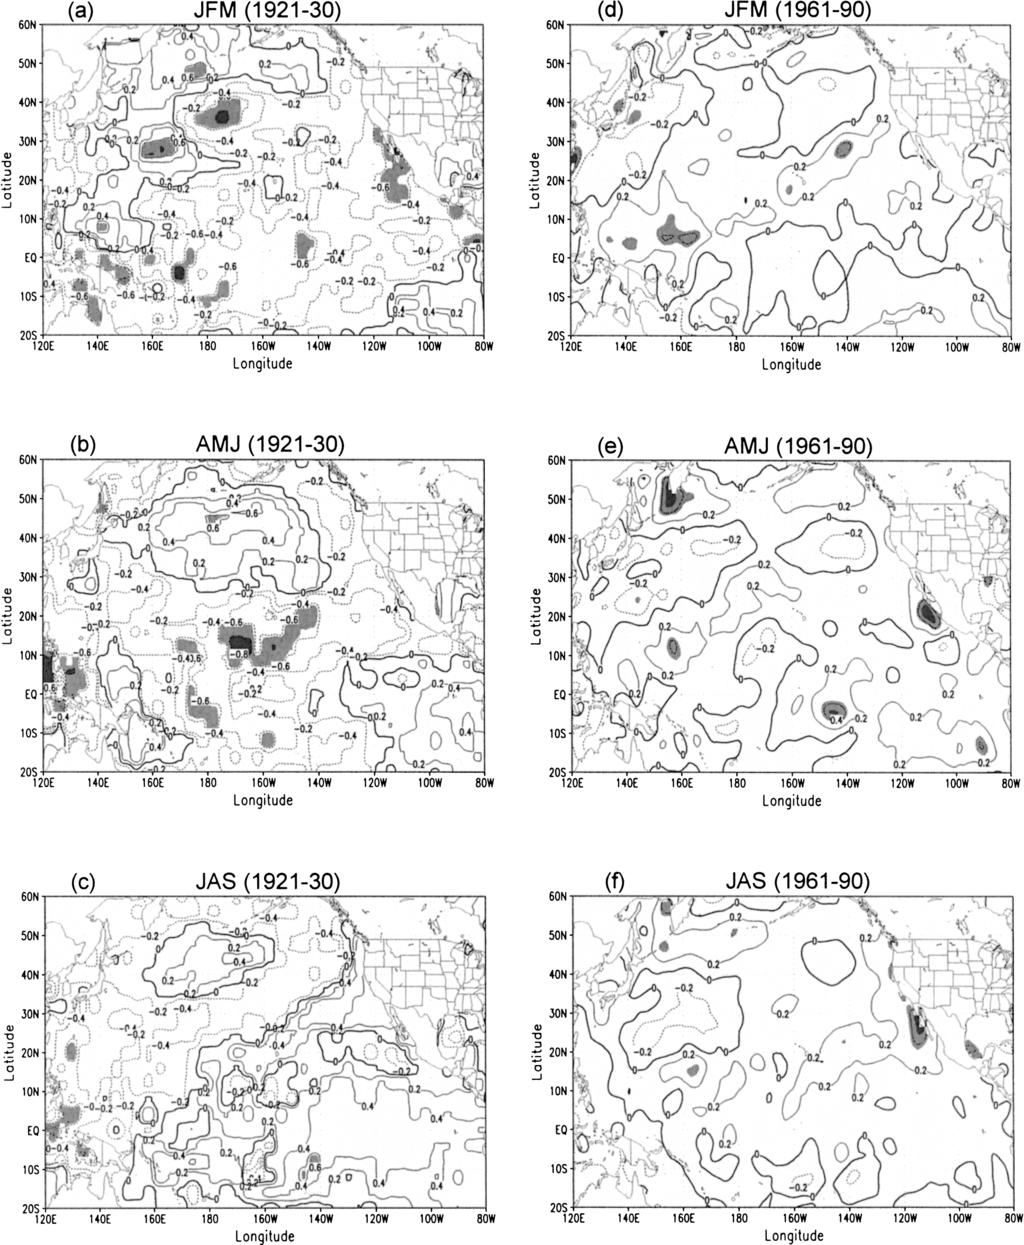 15 AUGUST 2004 NOTES AND CORRESPONDENCE 3239 FIG. 3. Correlations of the U.S. Southwest summer monsoon rainfall vs (a) the antecedent winter SSTA, (b) spring SSTA, and (c) summer SSTA in the North Pacific Ocean for the epoch 1921 30.